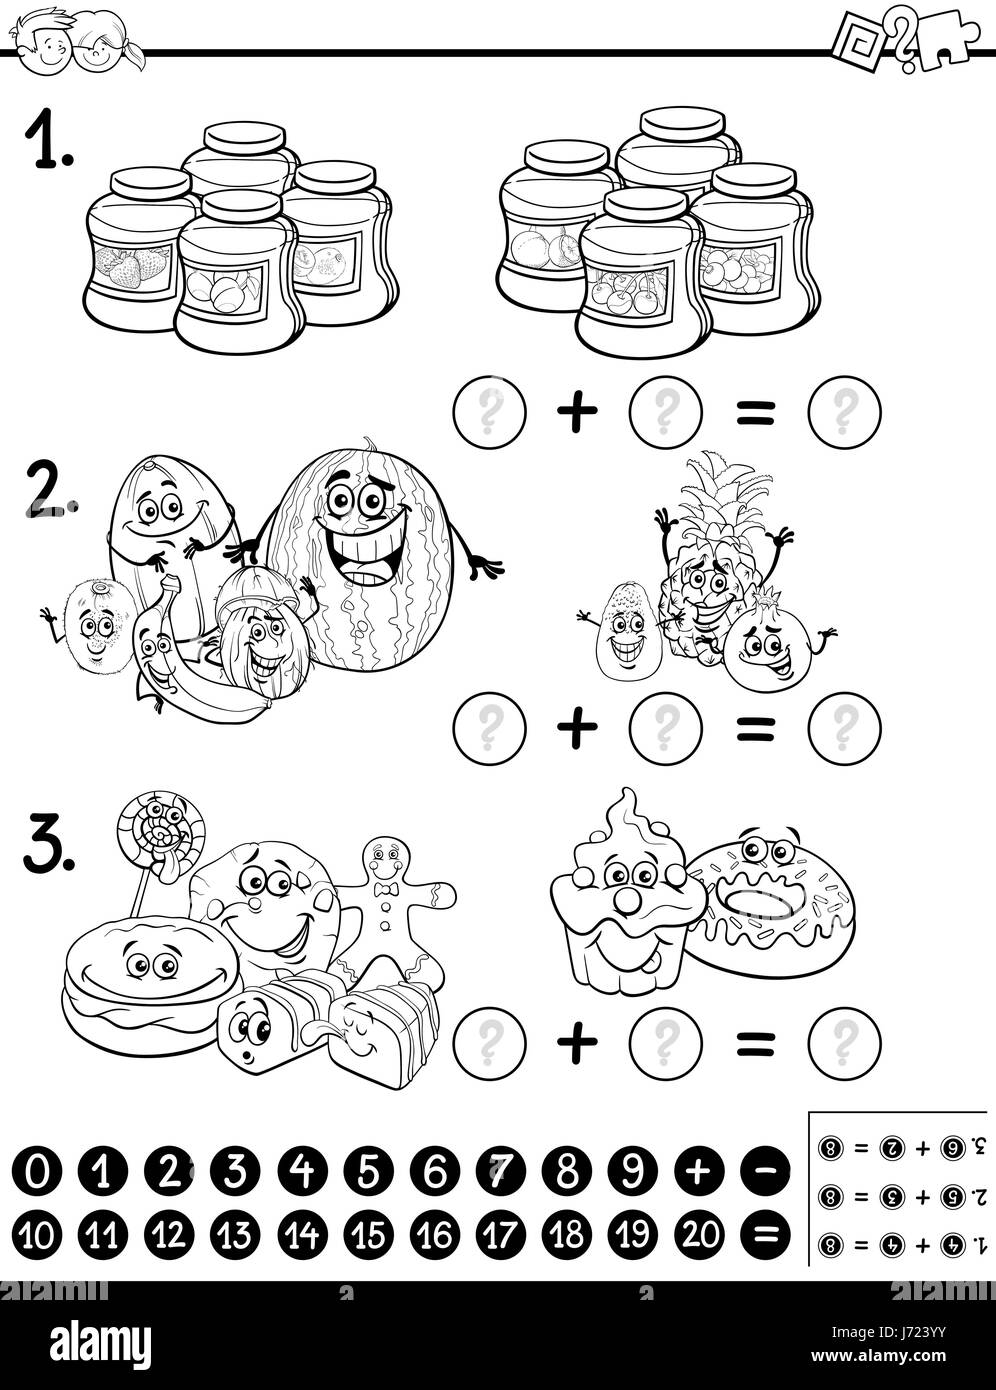 Black and White Cartoon Illustration of Educational Mathematical Activity for Children with Food Objects Coloring Page Stock Vector